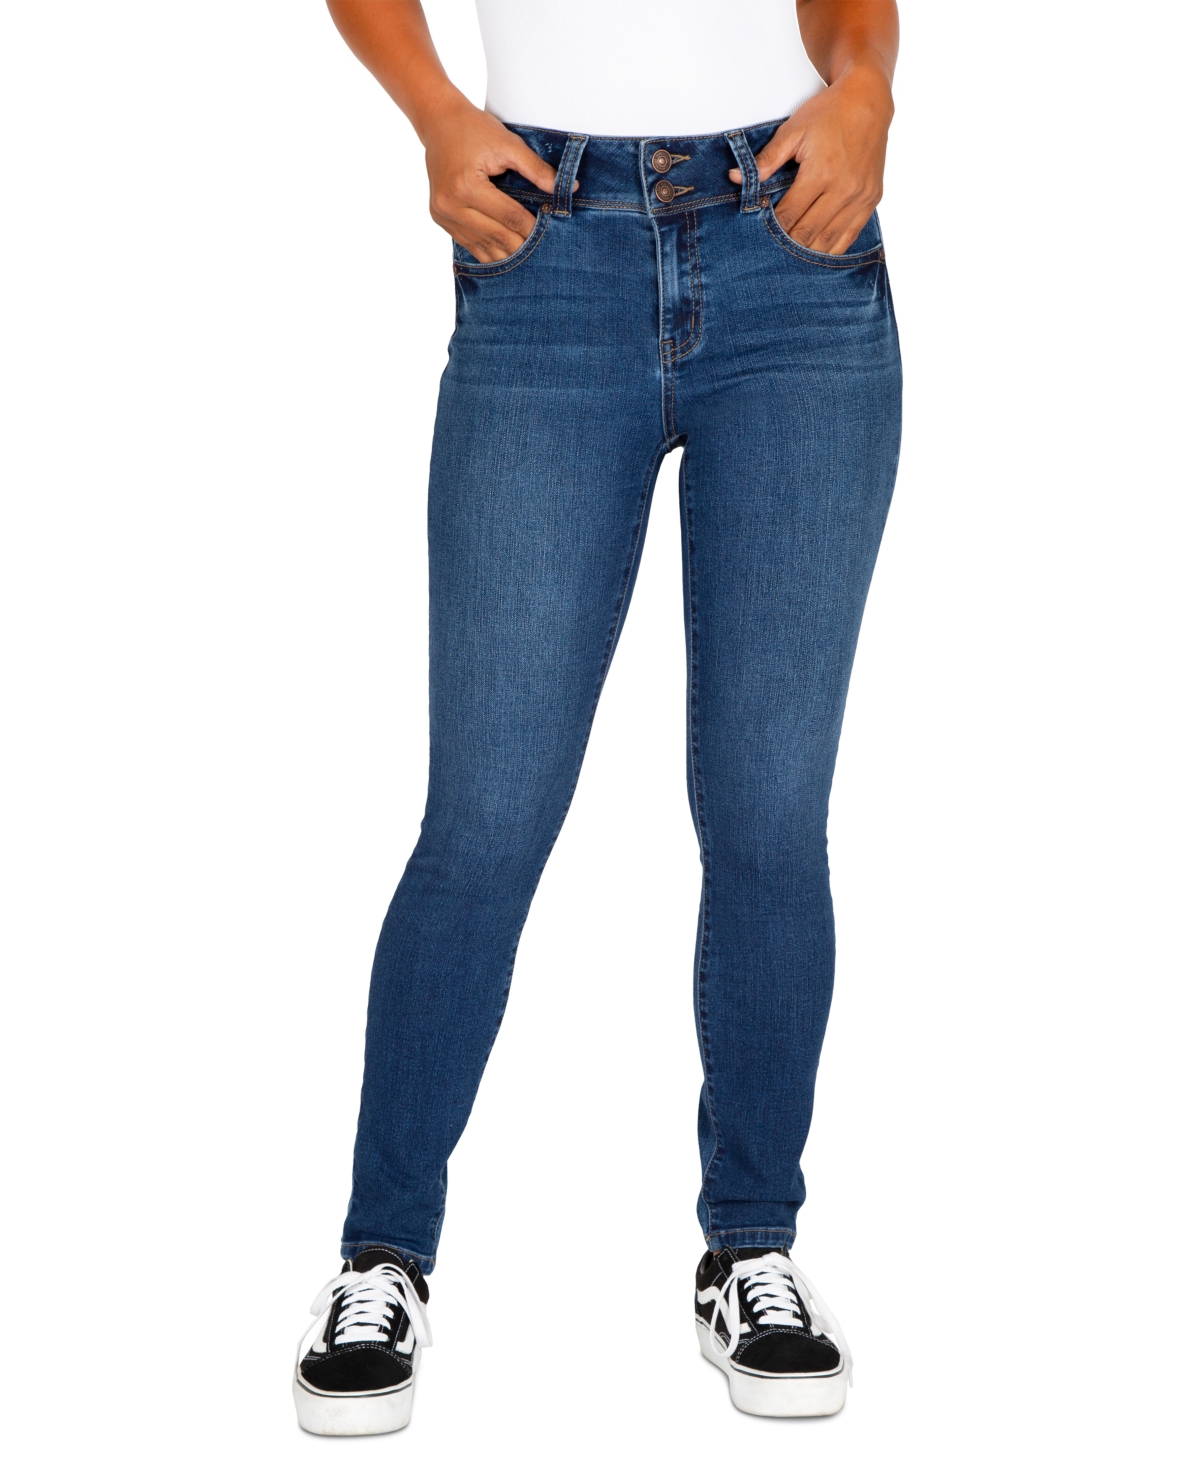 Juniors' Mid-Rise Booty-Shaping Skinny Jeans - Indigo Vintage